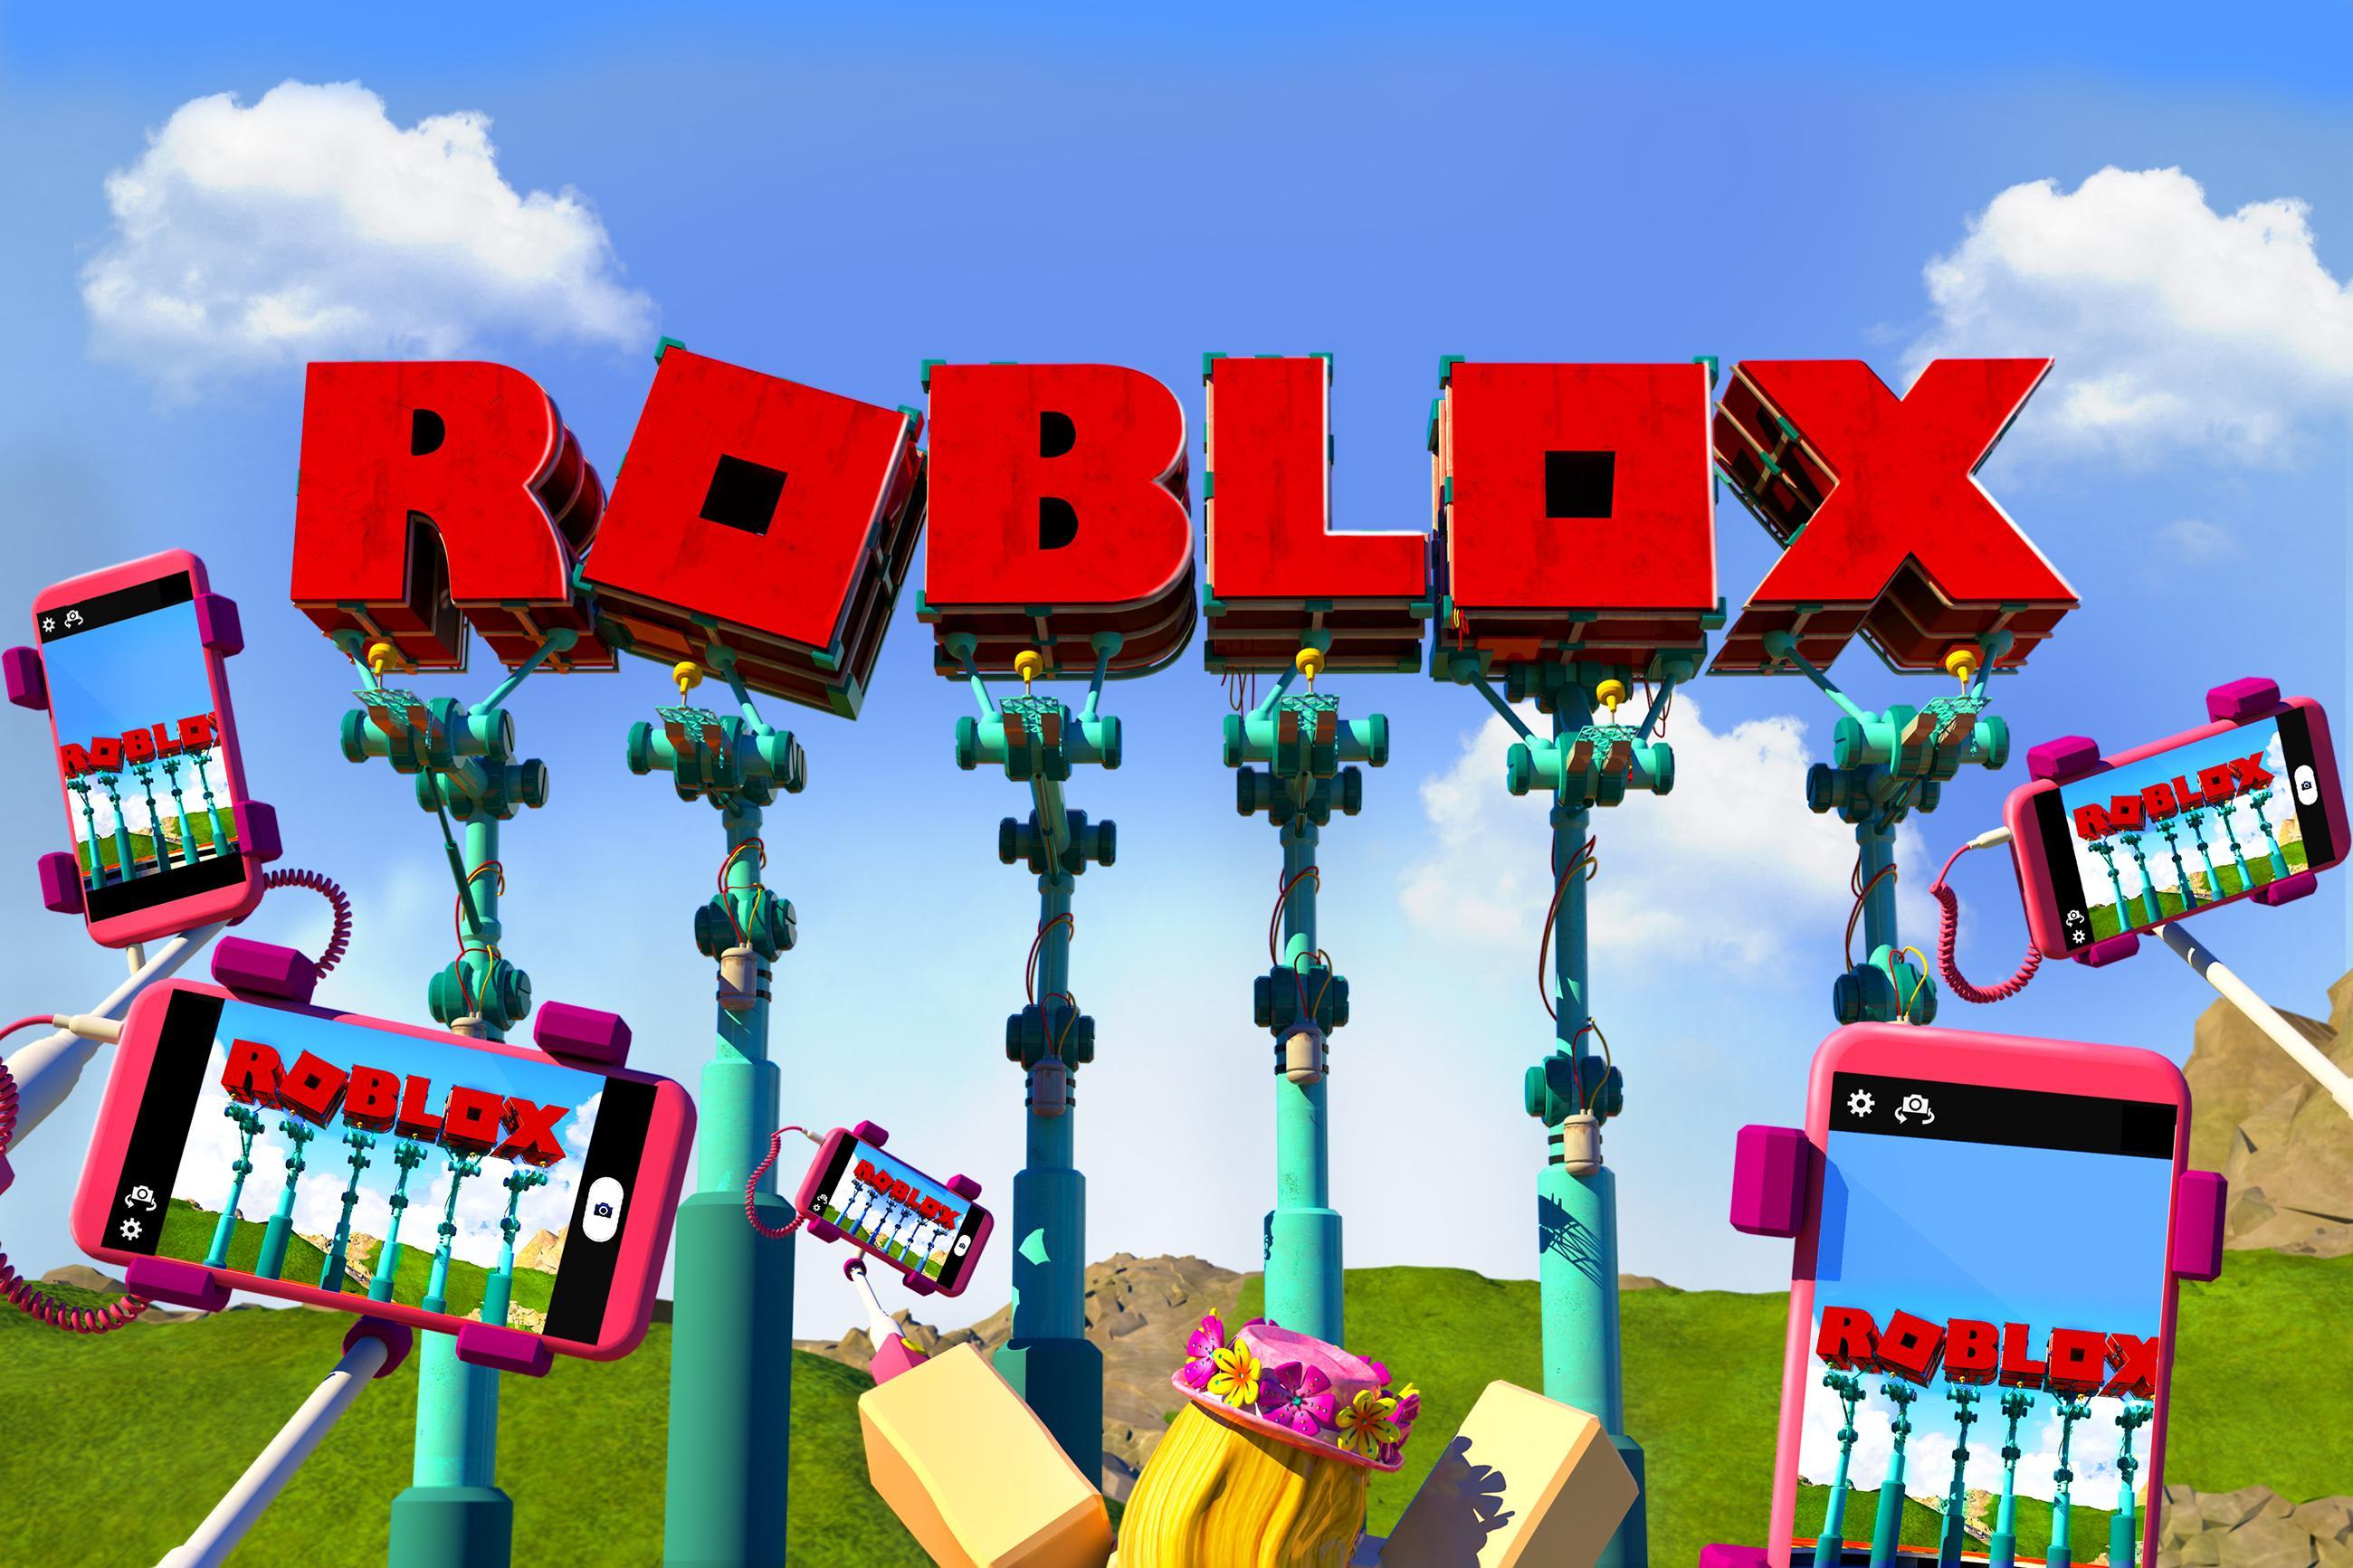 Roblox Wallpapers 2018 Hd For Android Apk Download - roblox wallpapers iphone